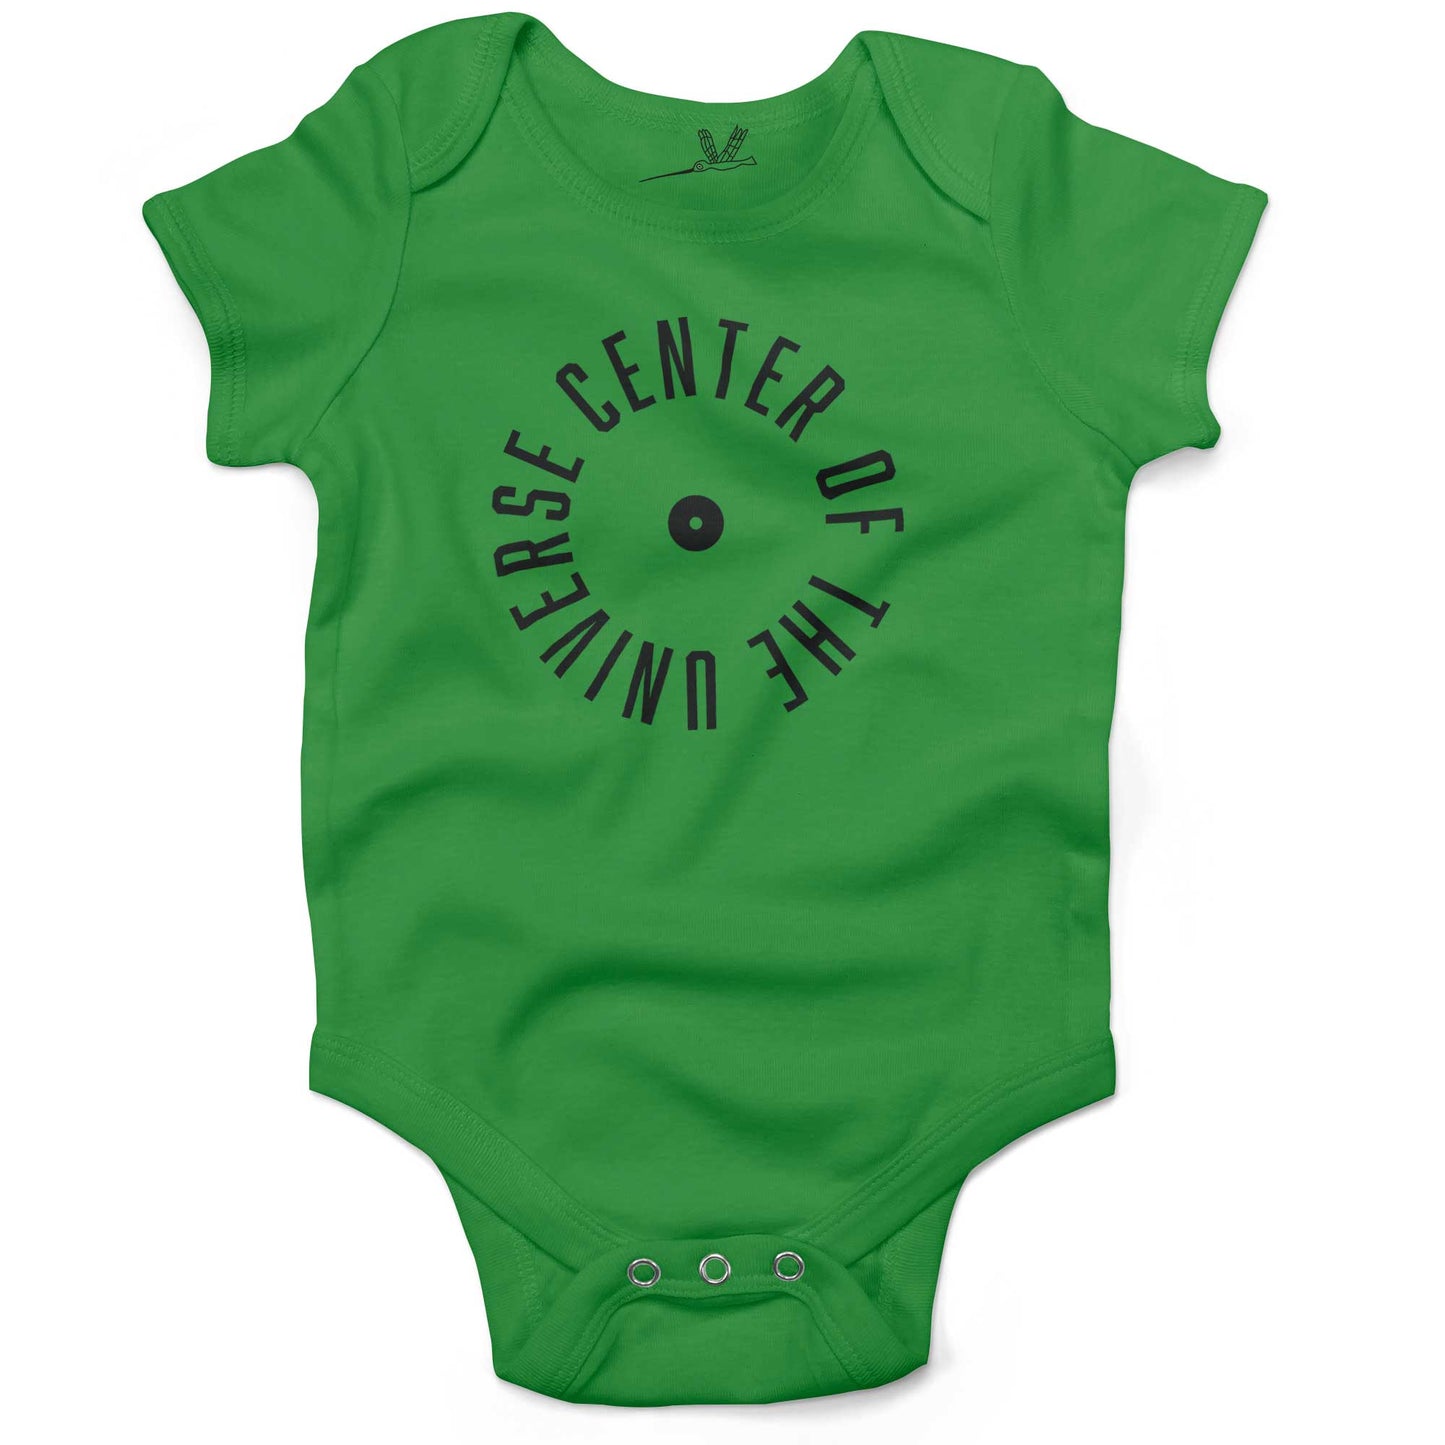 Center Of The Universe Baby One Piece or Raglan Tee-Grass Green-3-6 months